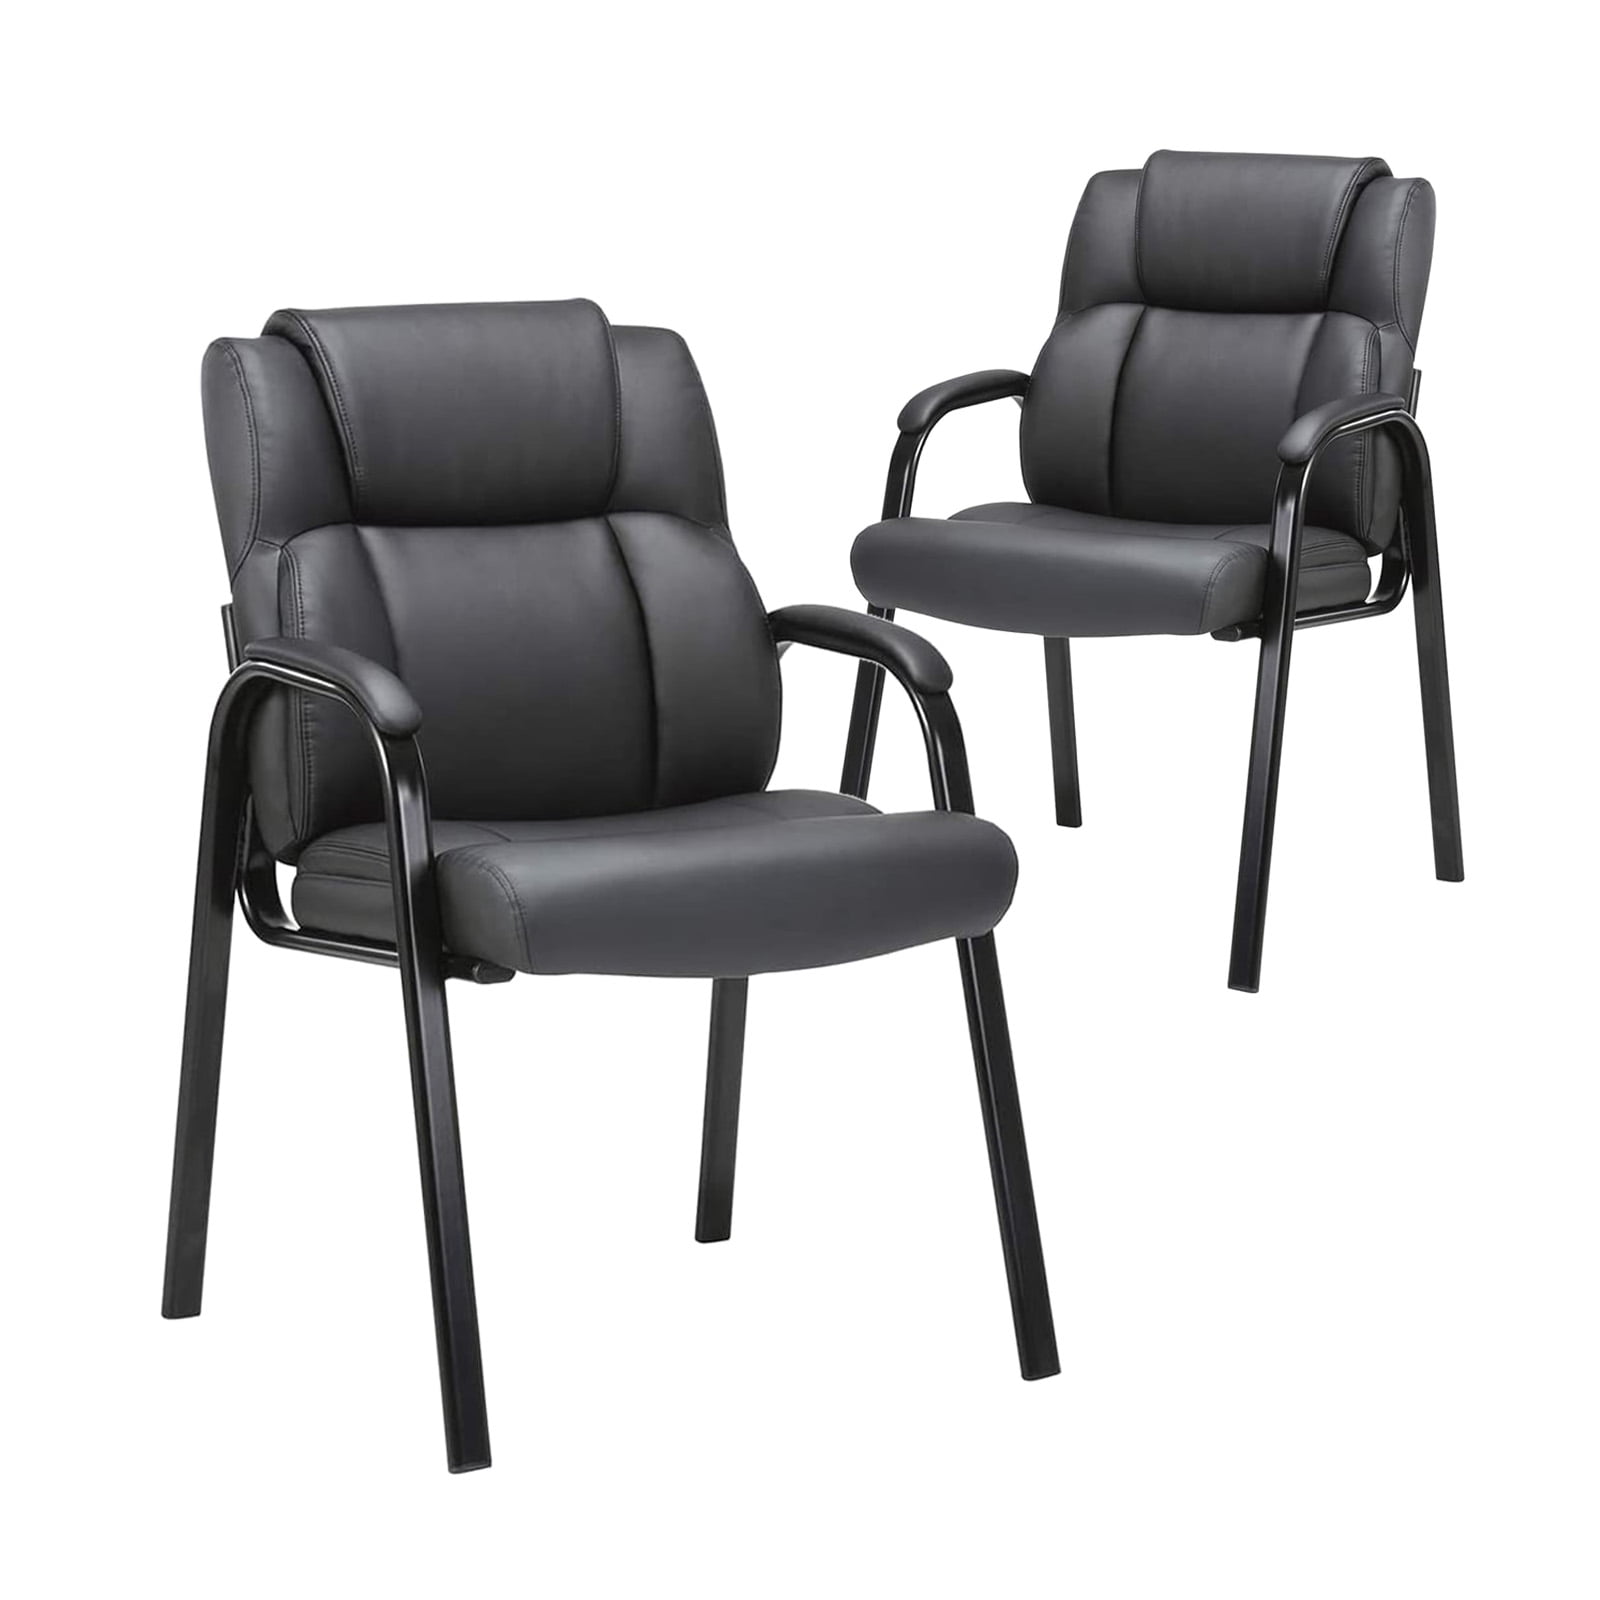 walnest Black PU Leather 2-seat Office Airport Reception Chairs Waiting Room Visitor Guest Sofa Double Seats 